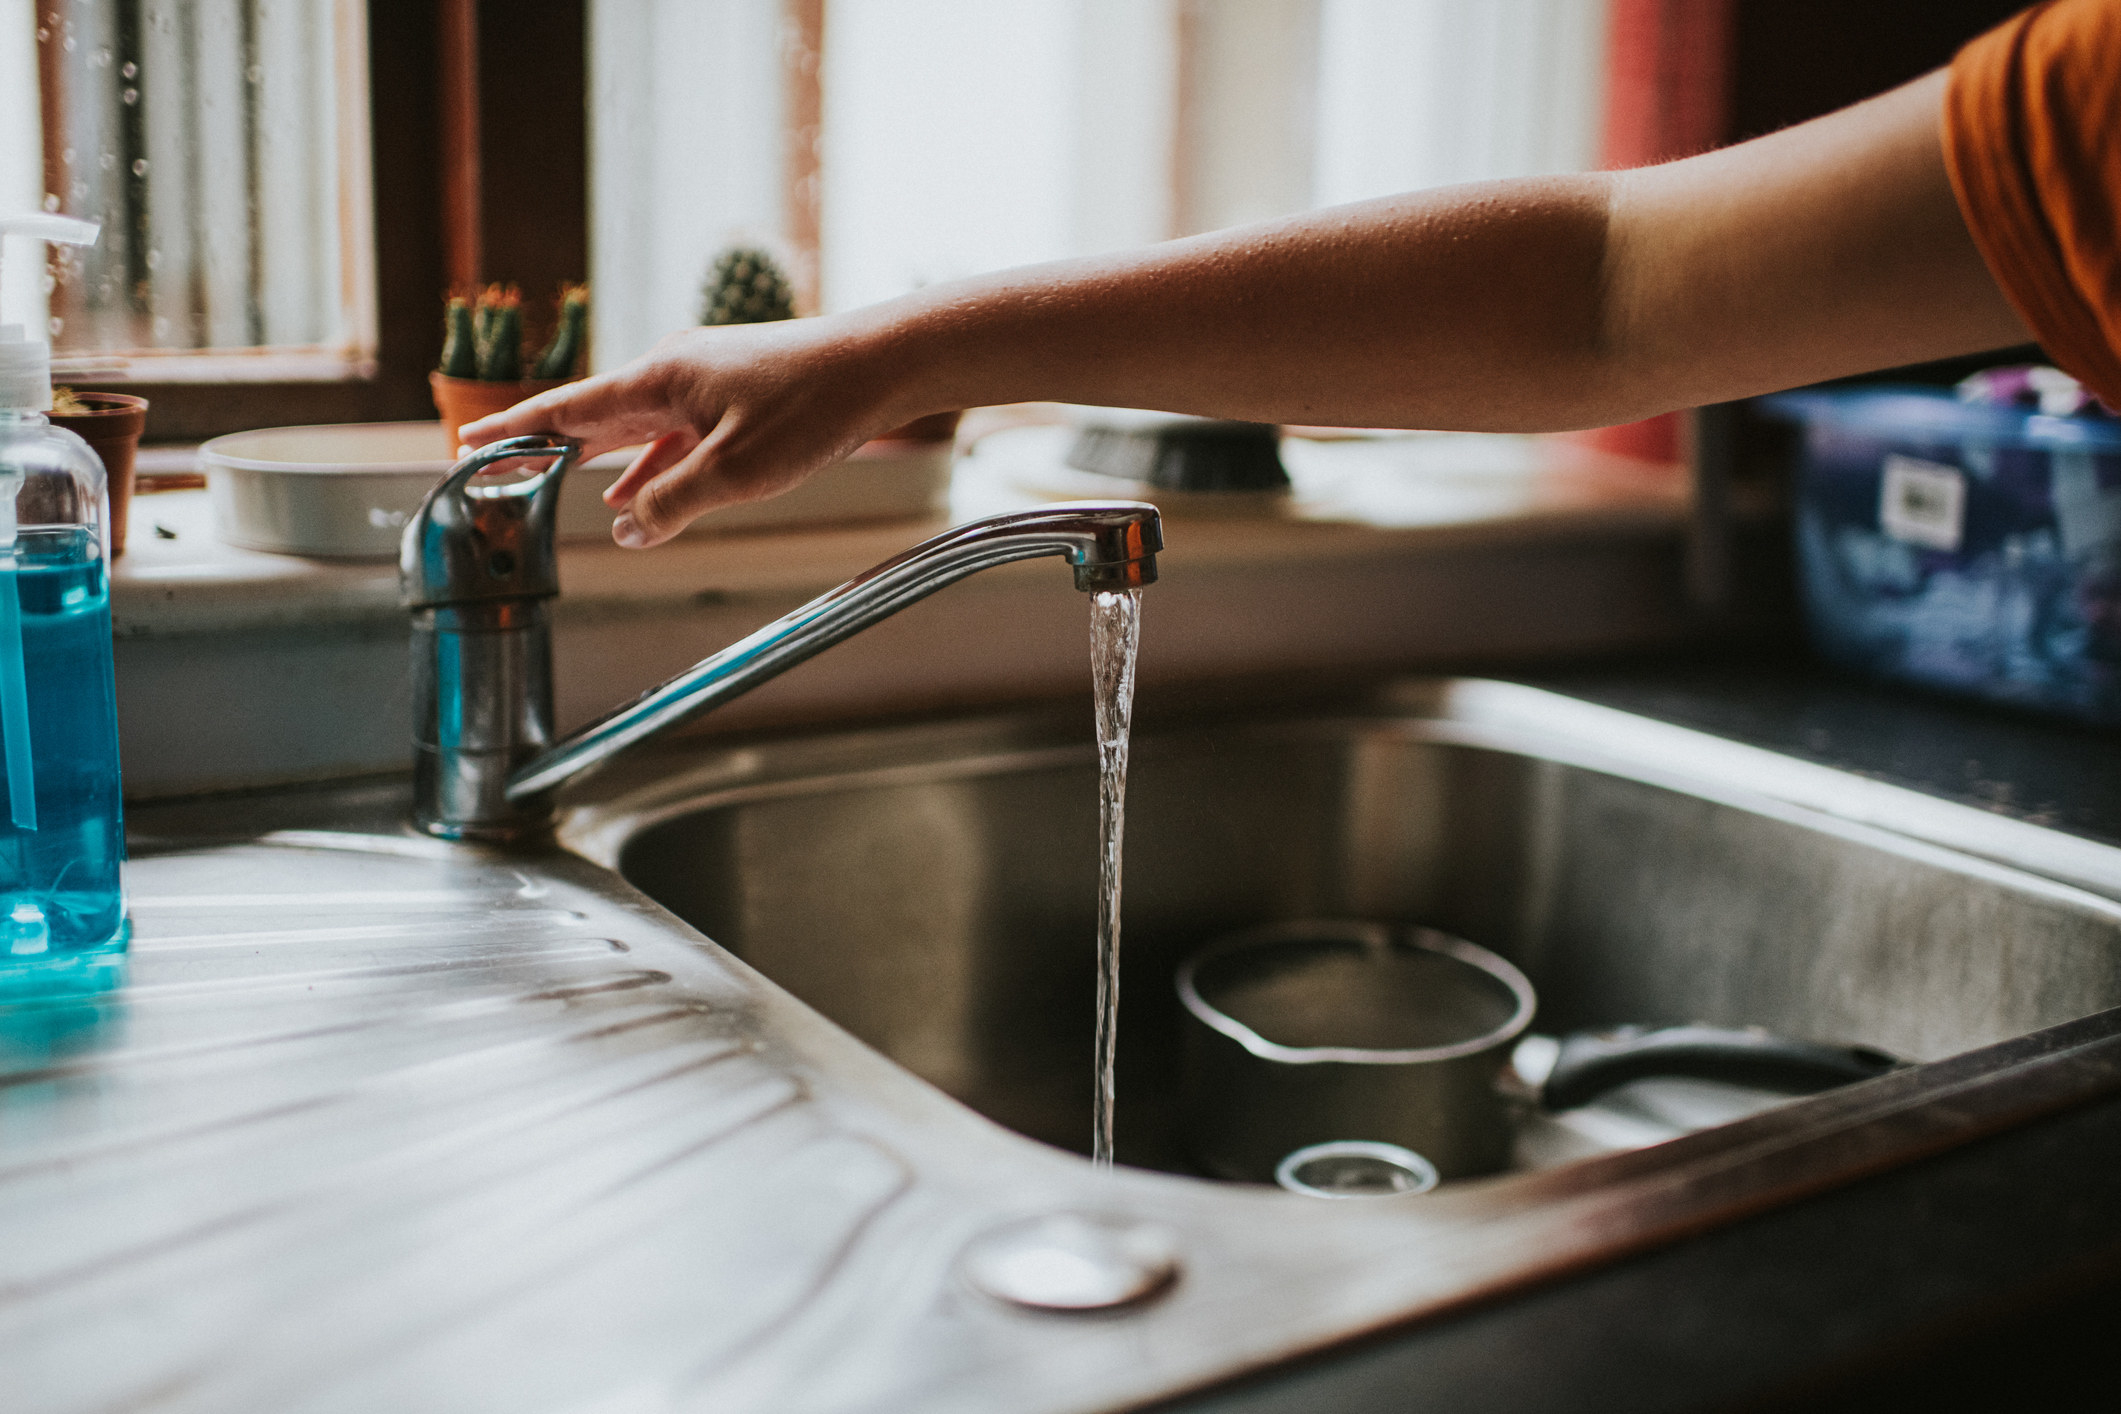 An arm pushing down the handle of a running faucet with a small pot and a glass in the sink